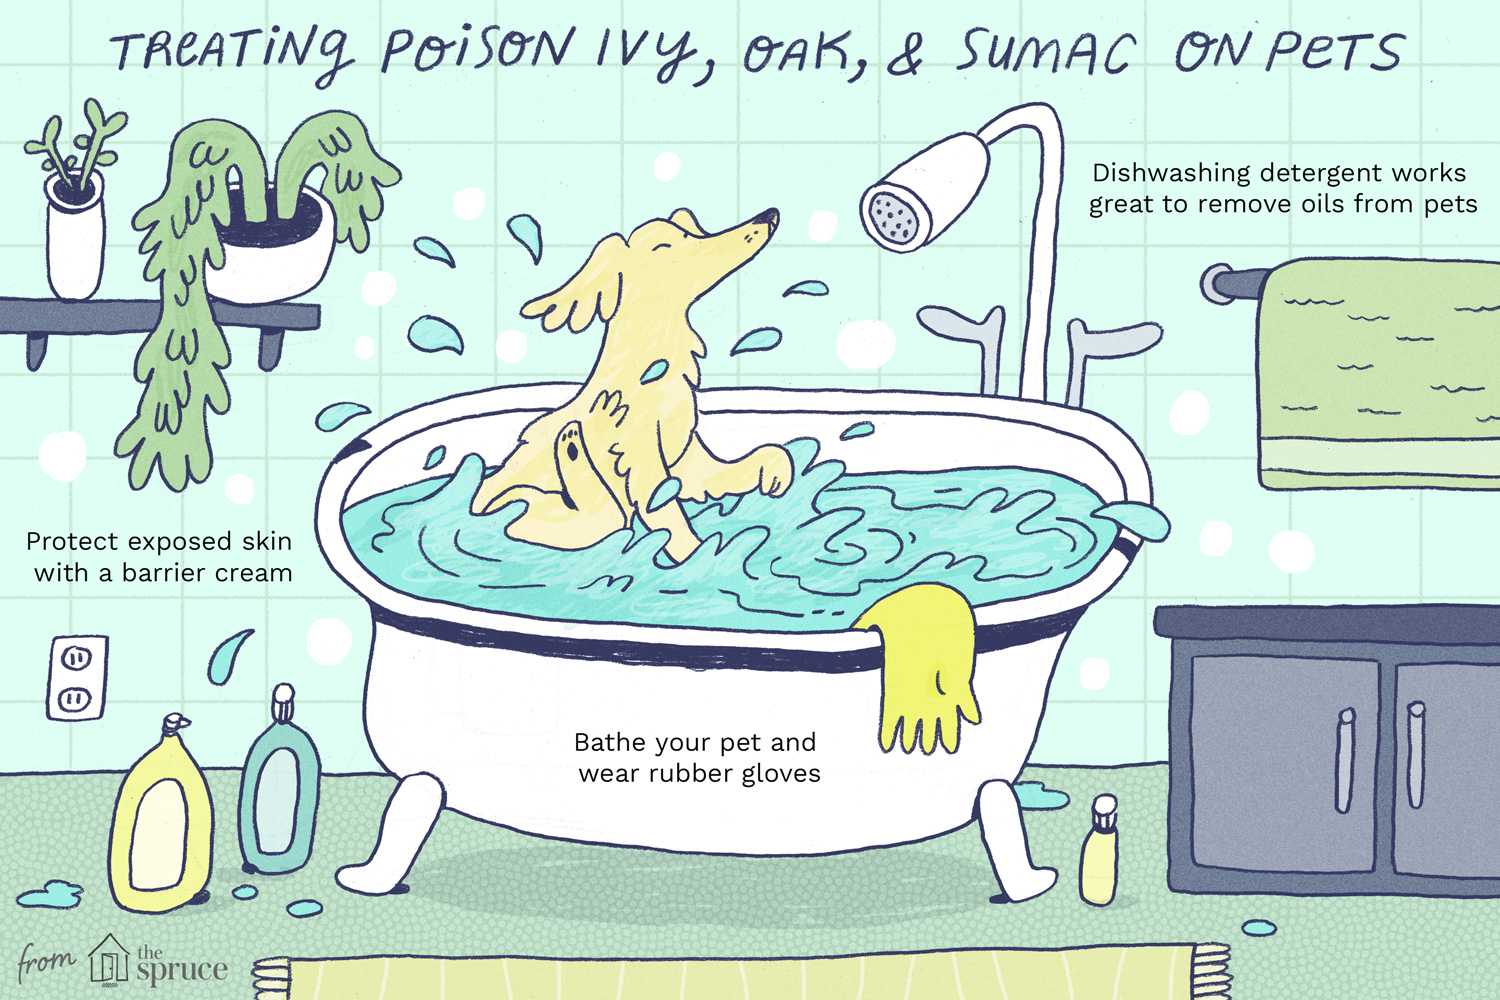 How to illustration on treating poison ivy, oak, and sumac on pets. There is a dog in a tub